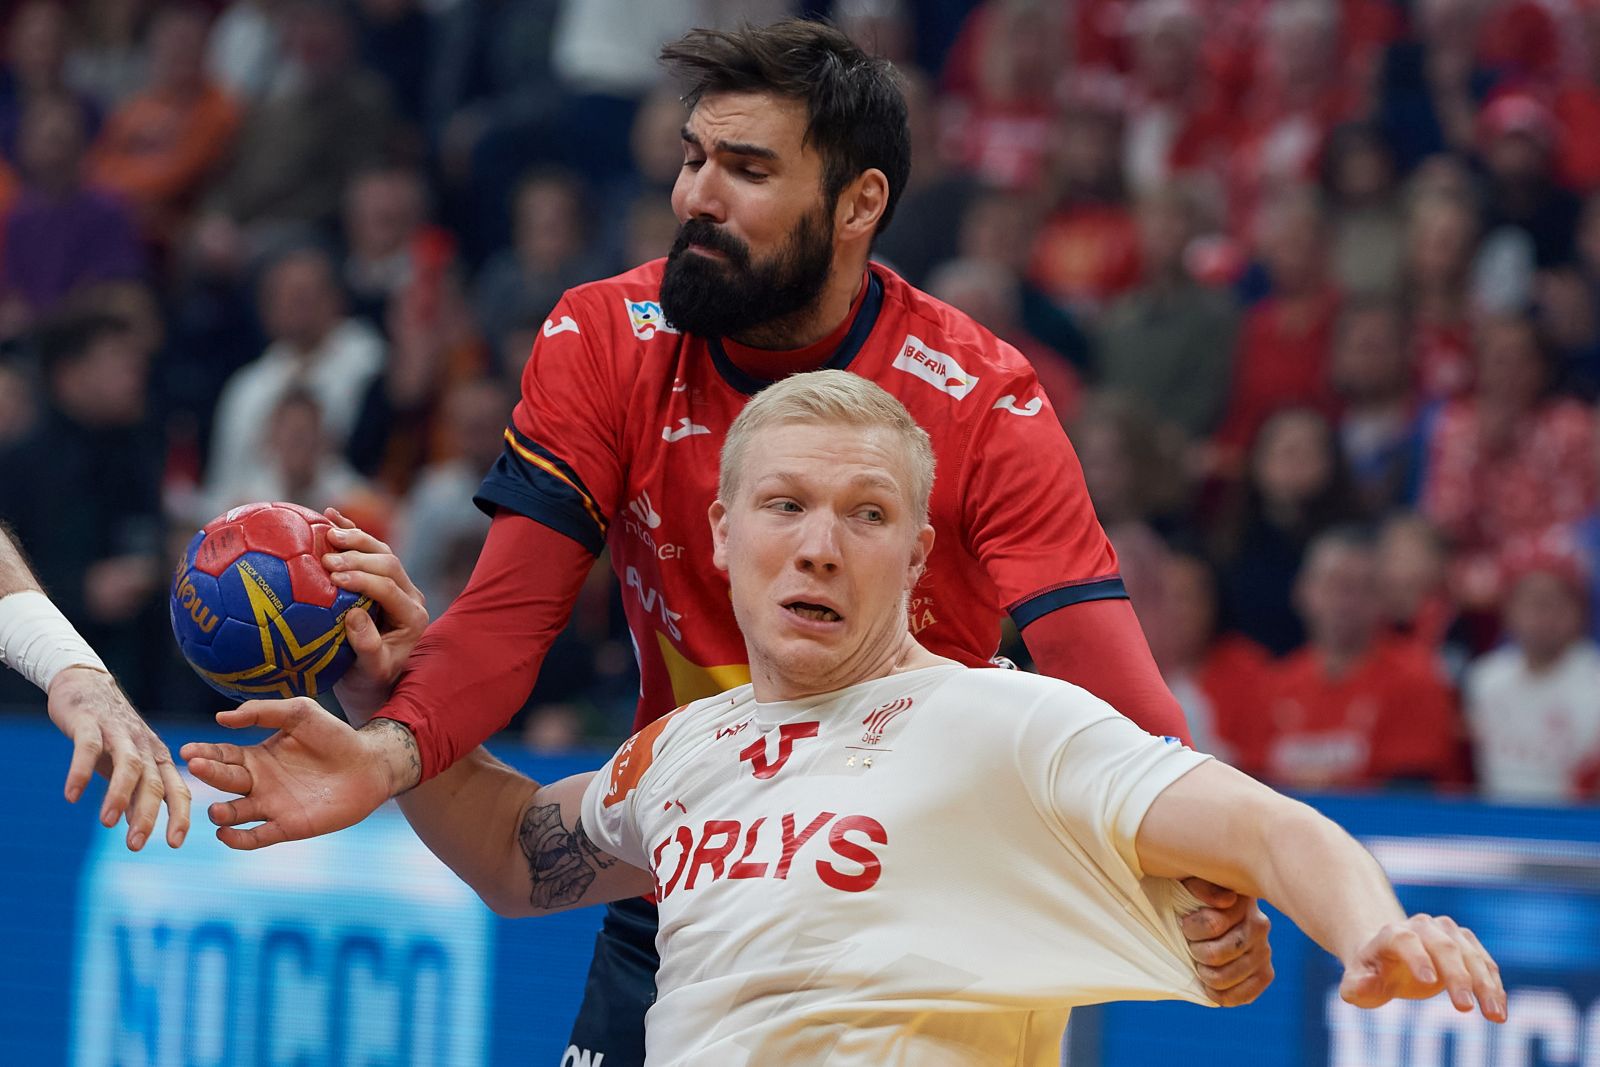 epa10434377 Jorge Maqueda (L) of Spain and Magnus Jensen Saugstrup (R) of Denmark in action during the 2023 IHF Men’s Handball World Championship semi-final match between Spain and Denmark, in Gdansk, Poland, 27 January 2023.  EPA/Adam Warzawa POLAND OUT